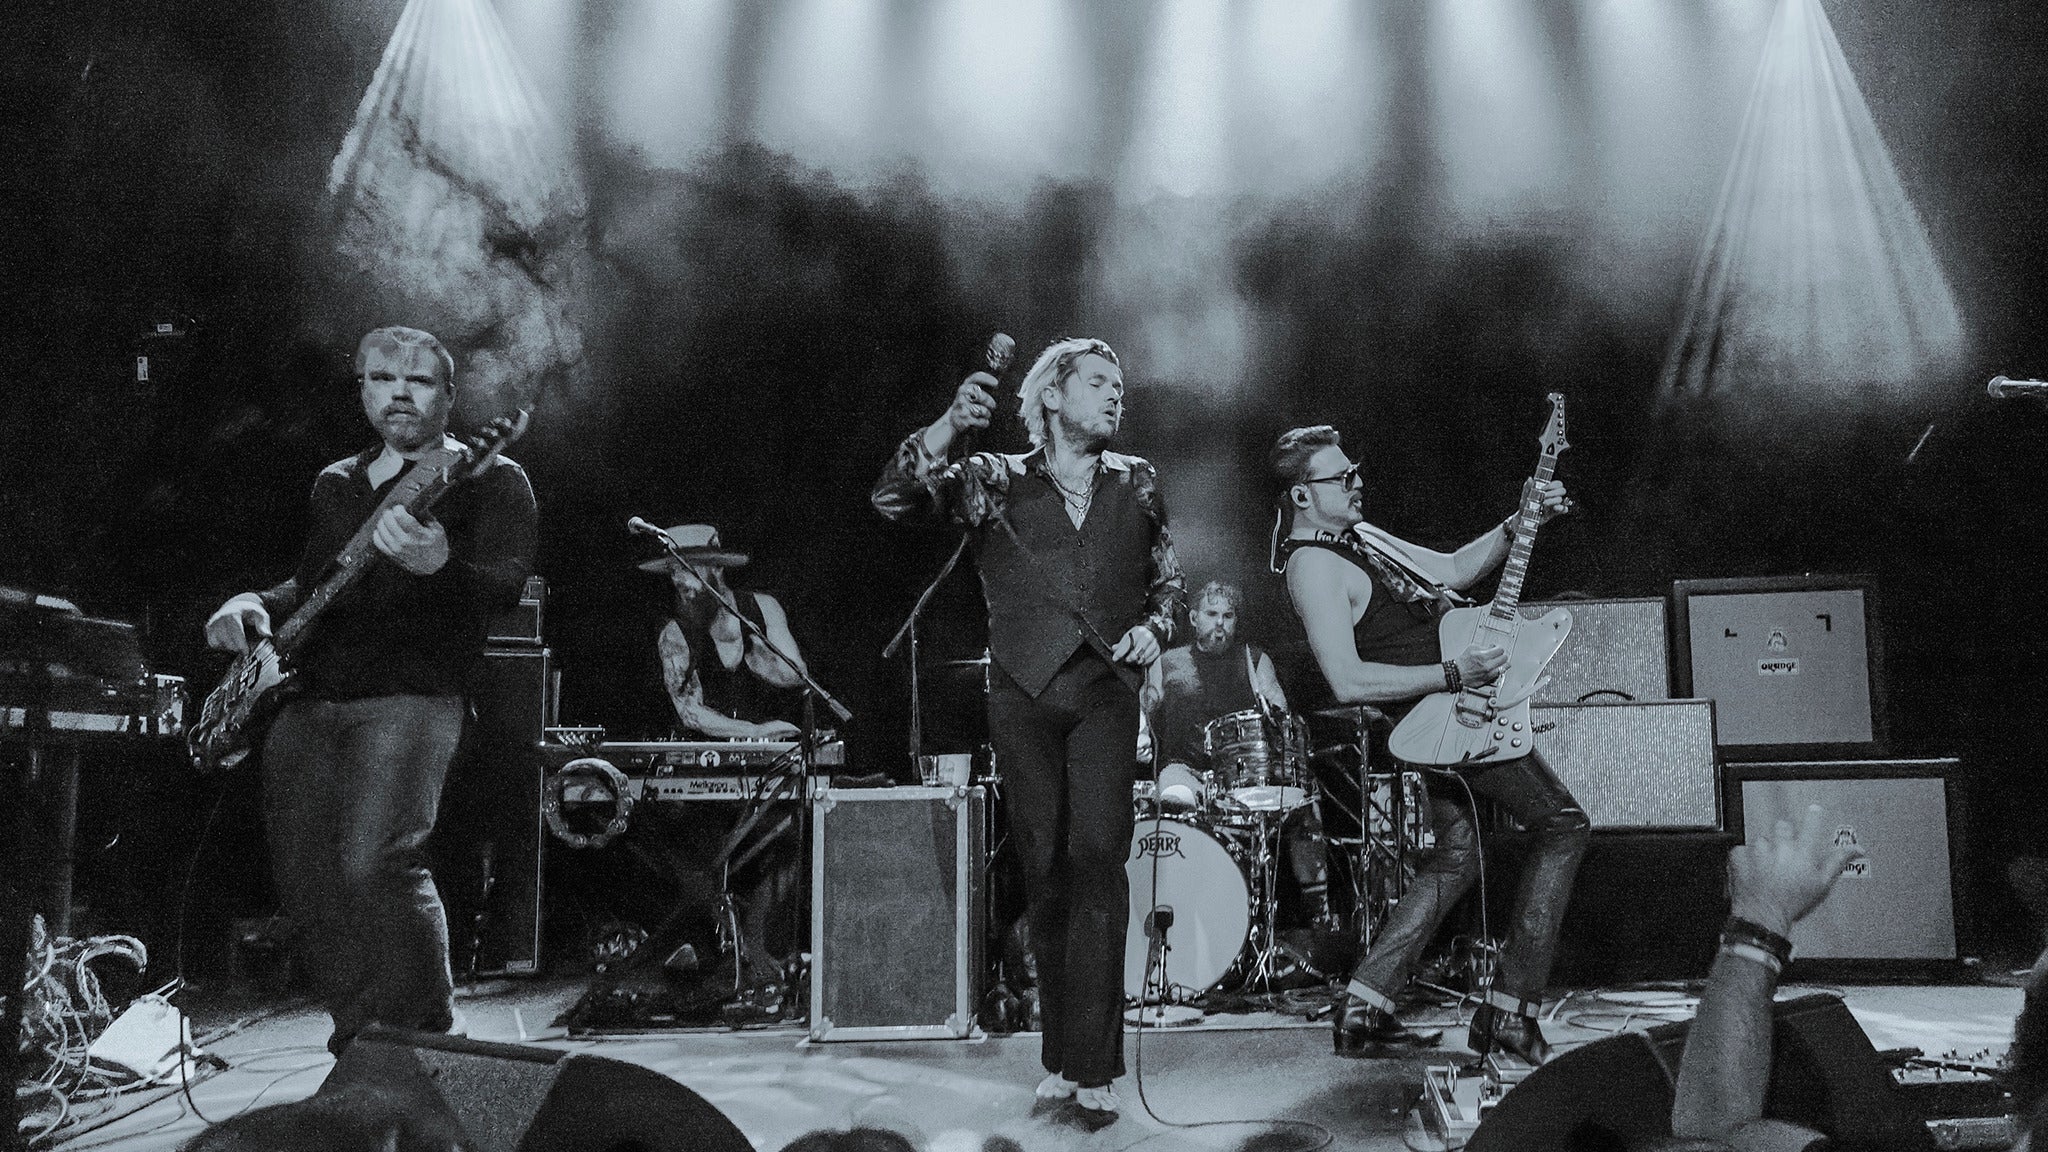 Rival Sons with Dorothy in Detroit promo photo for Bandsintown presale offer code